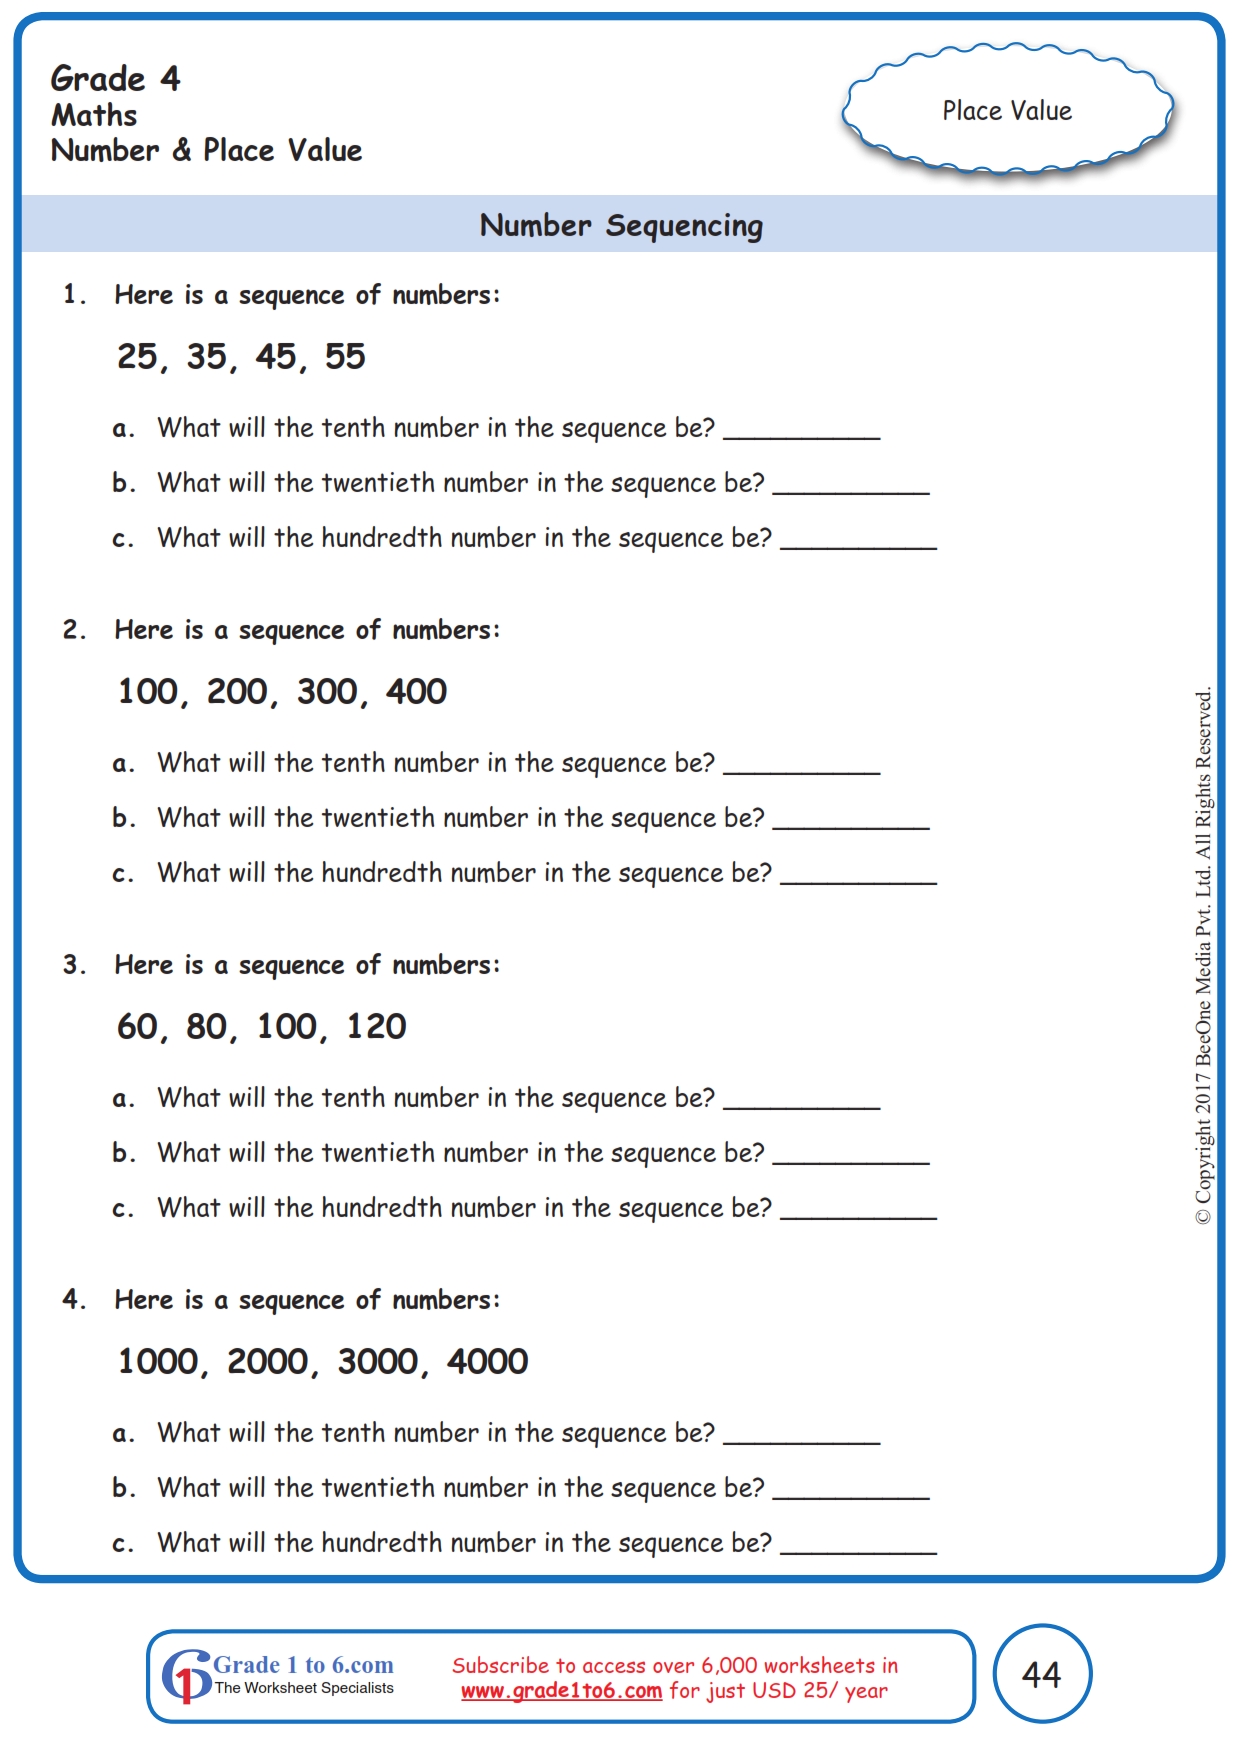 Number Patterns Patterns Worksheets Dynamically Created Patterns Worksheets Adrien Durham